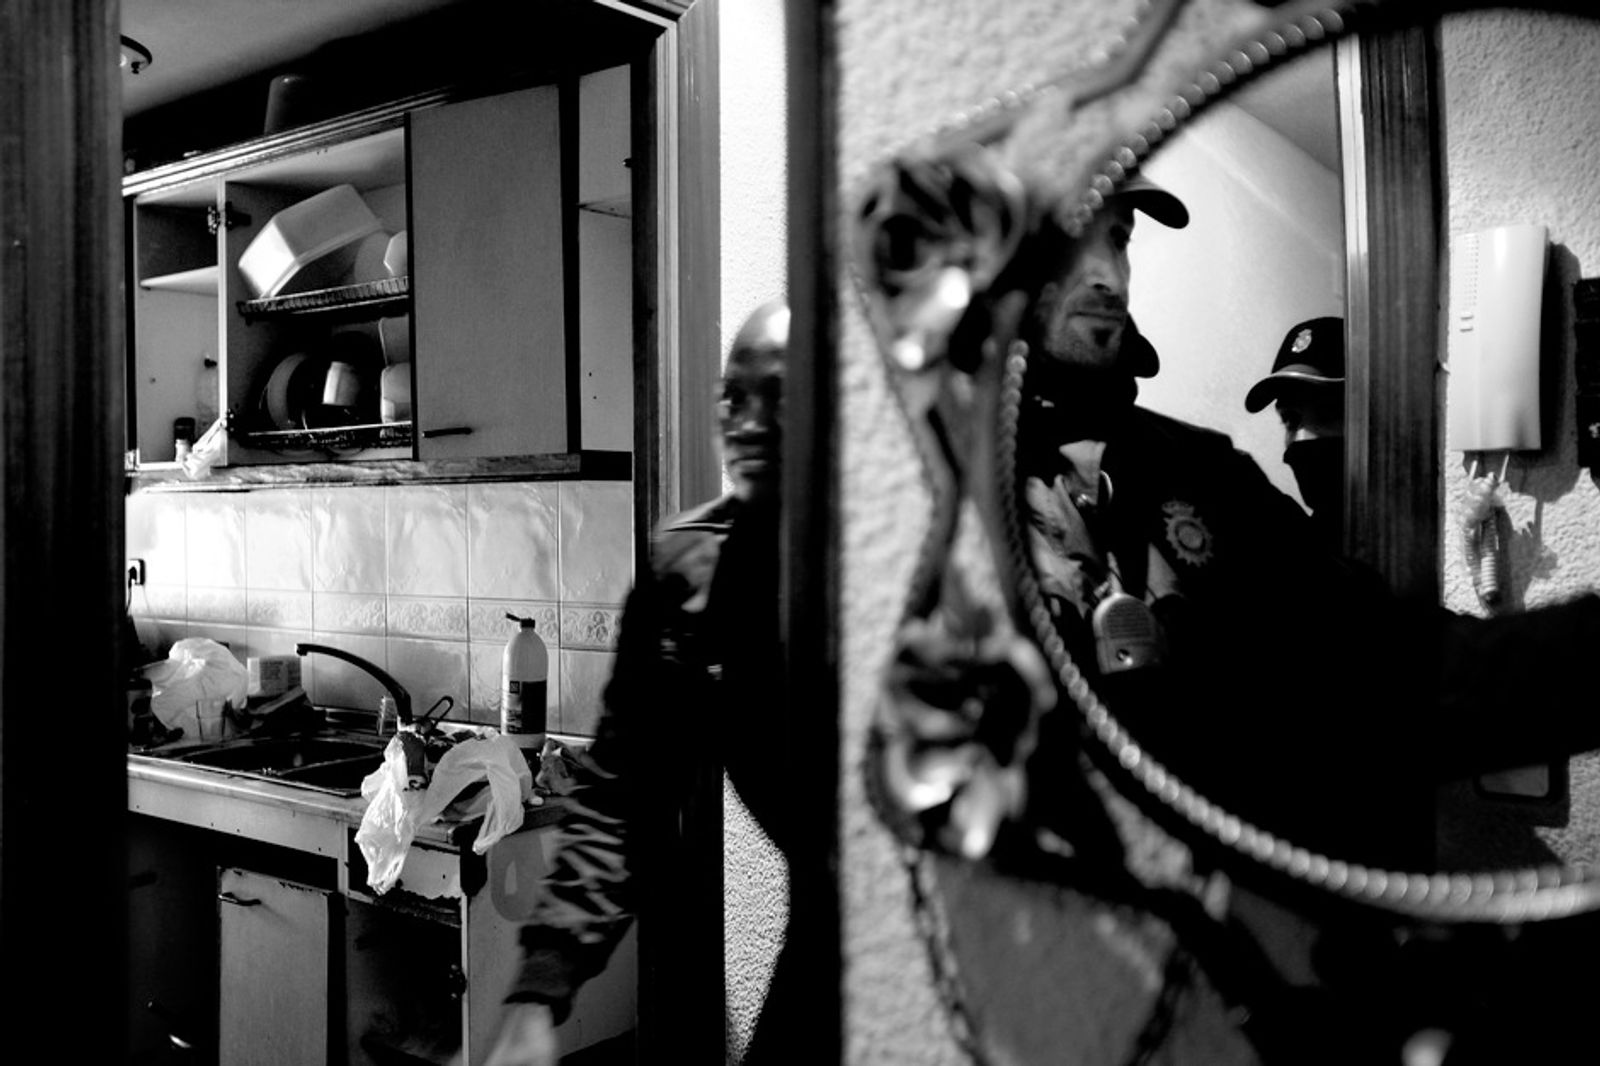 © Olmo Calvo - National police get into Antonio Tomás´s house beside the judicial commission to evict him. Leganés December 14, 2011.